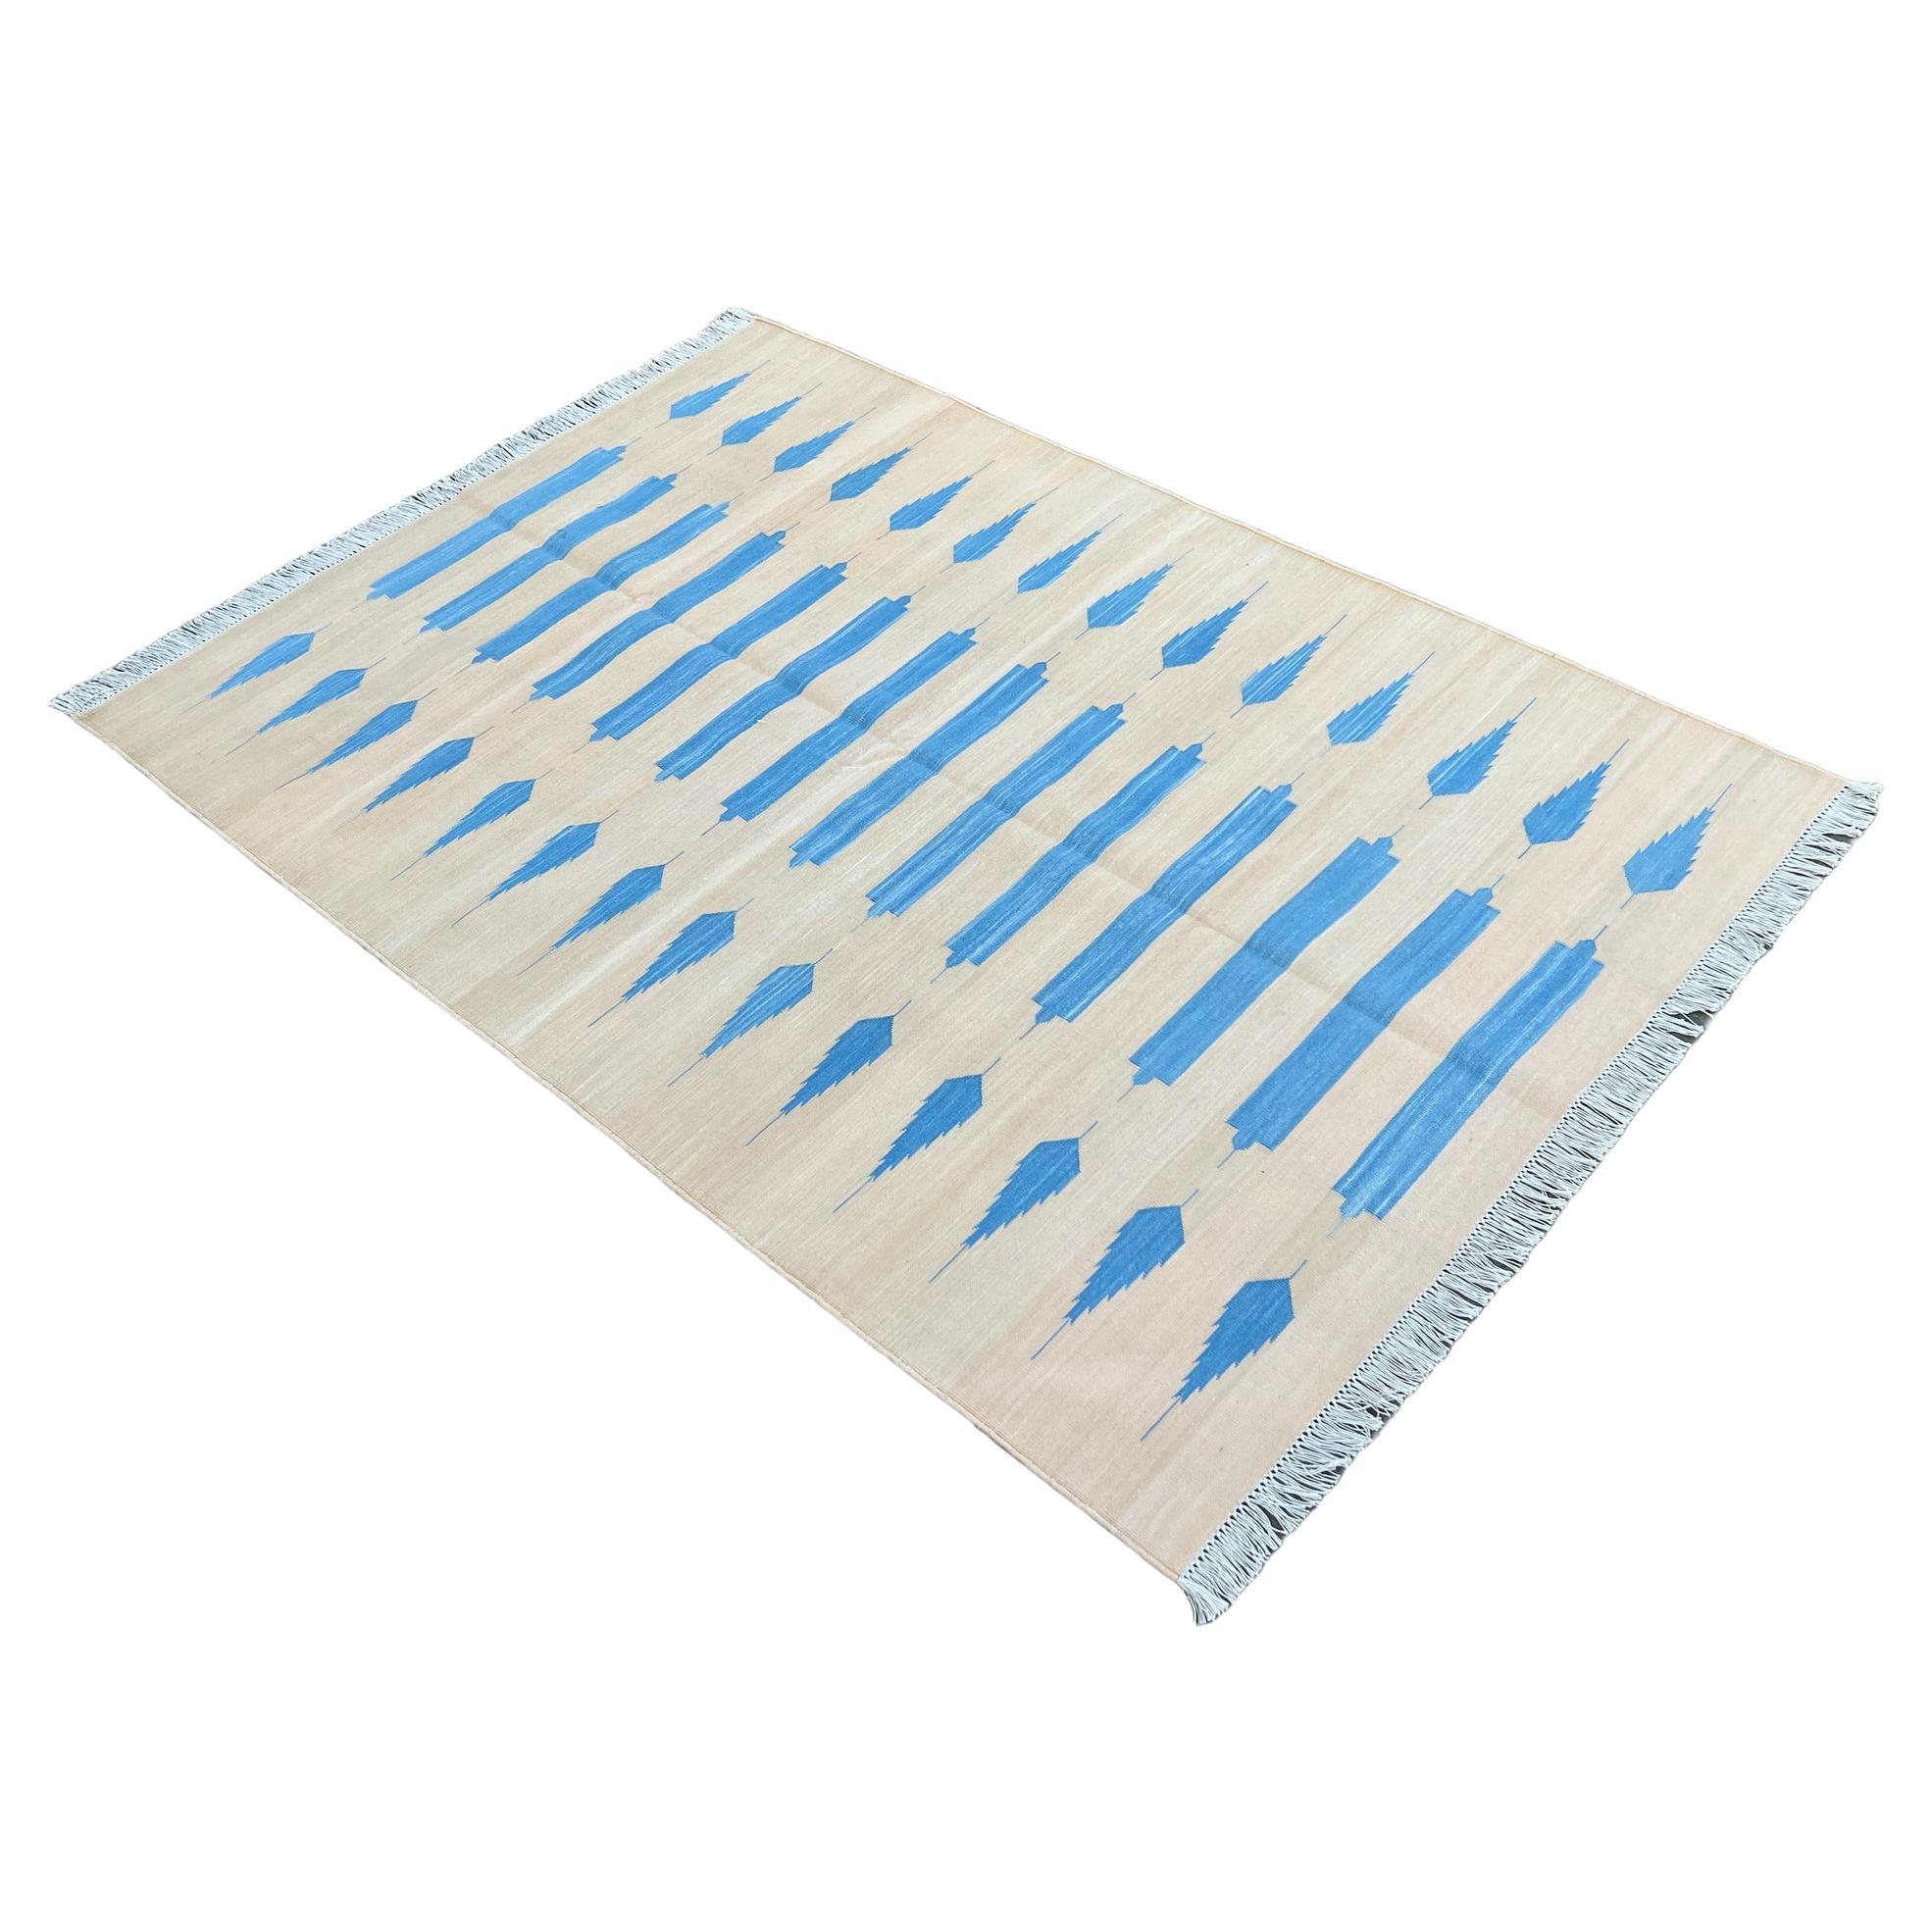 Handmade Cotton Area Flat Weave Rug, 4x6 Cream And Blue Striped Indian Dhurrie For Sale